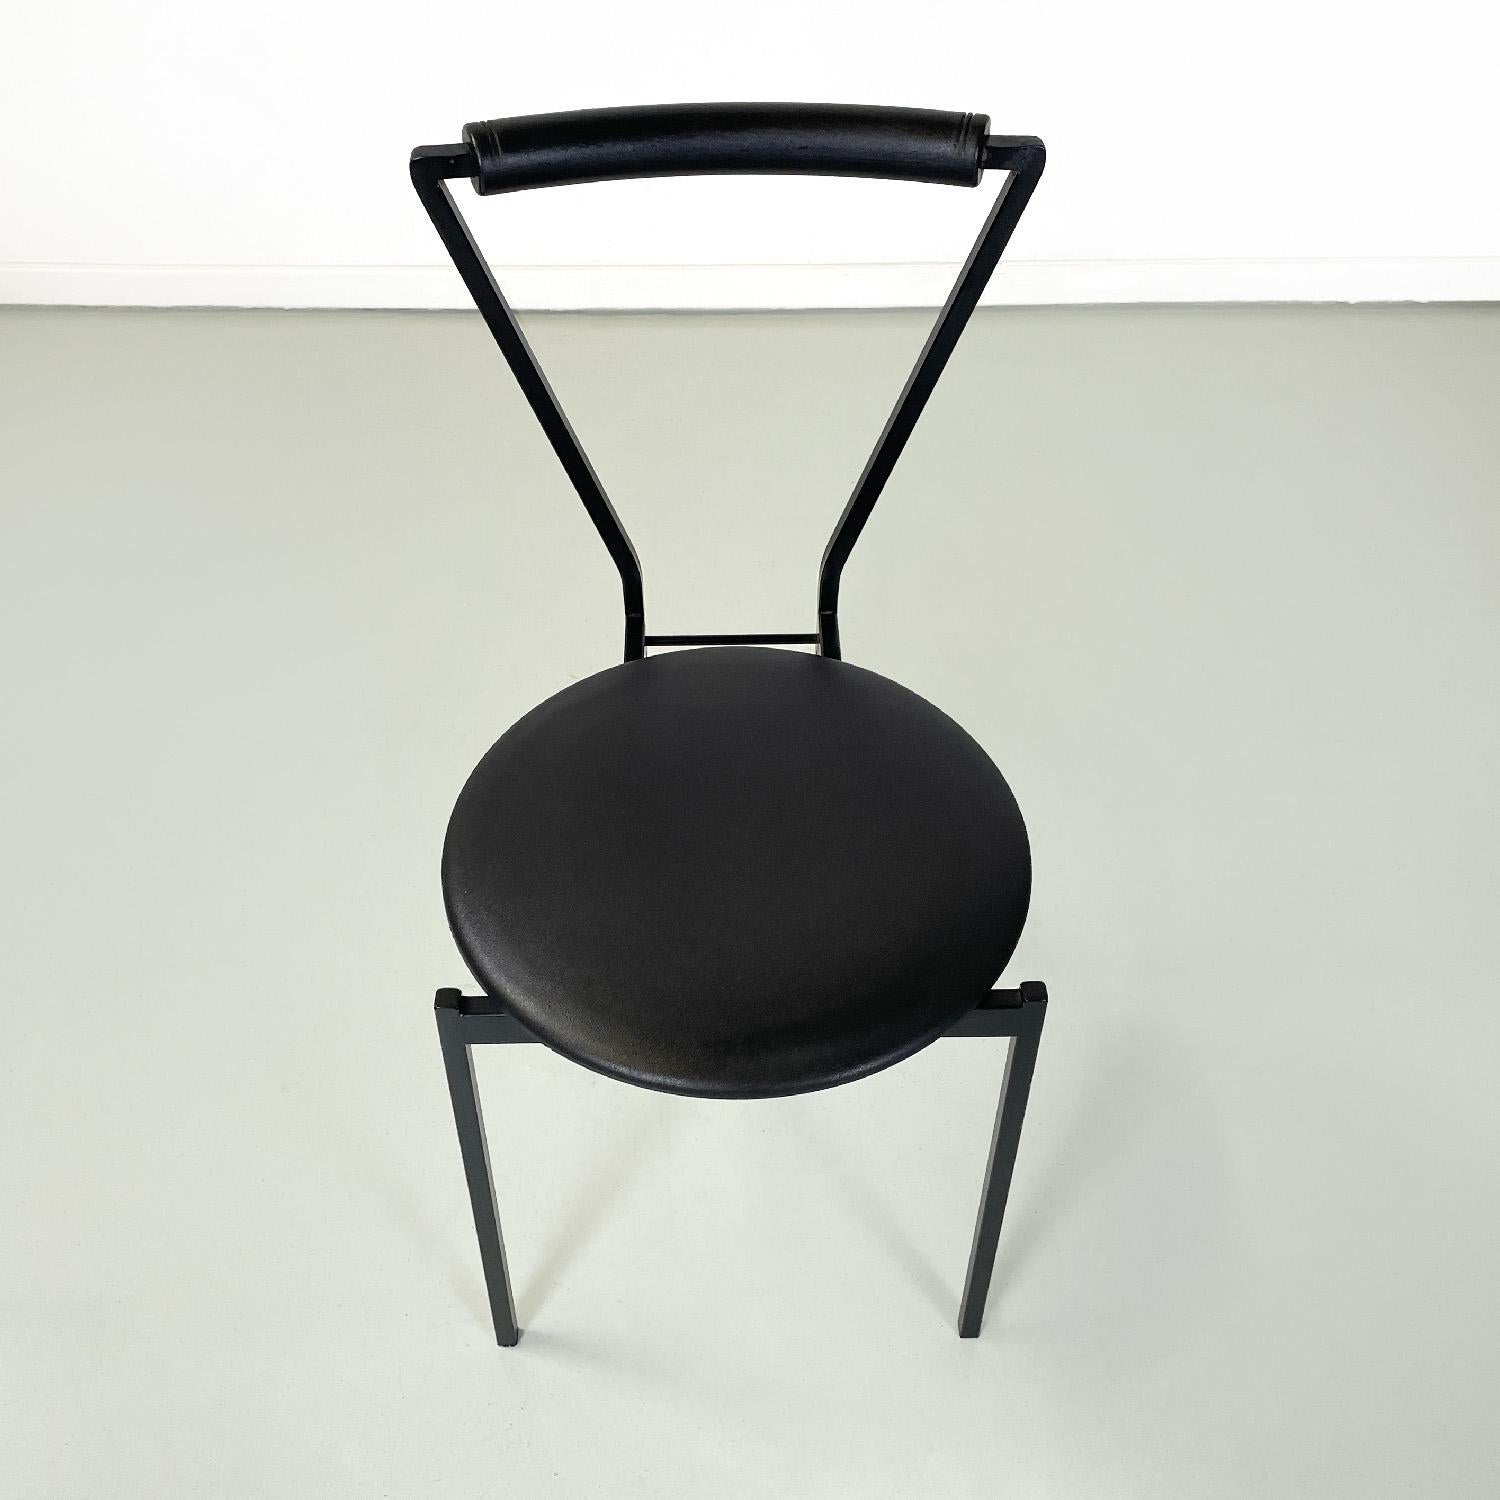 Italian modern chairs in black metal and rubber, 1980s For Sale 1